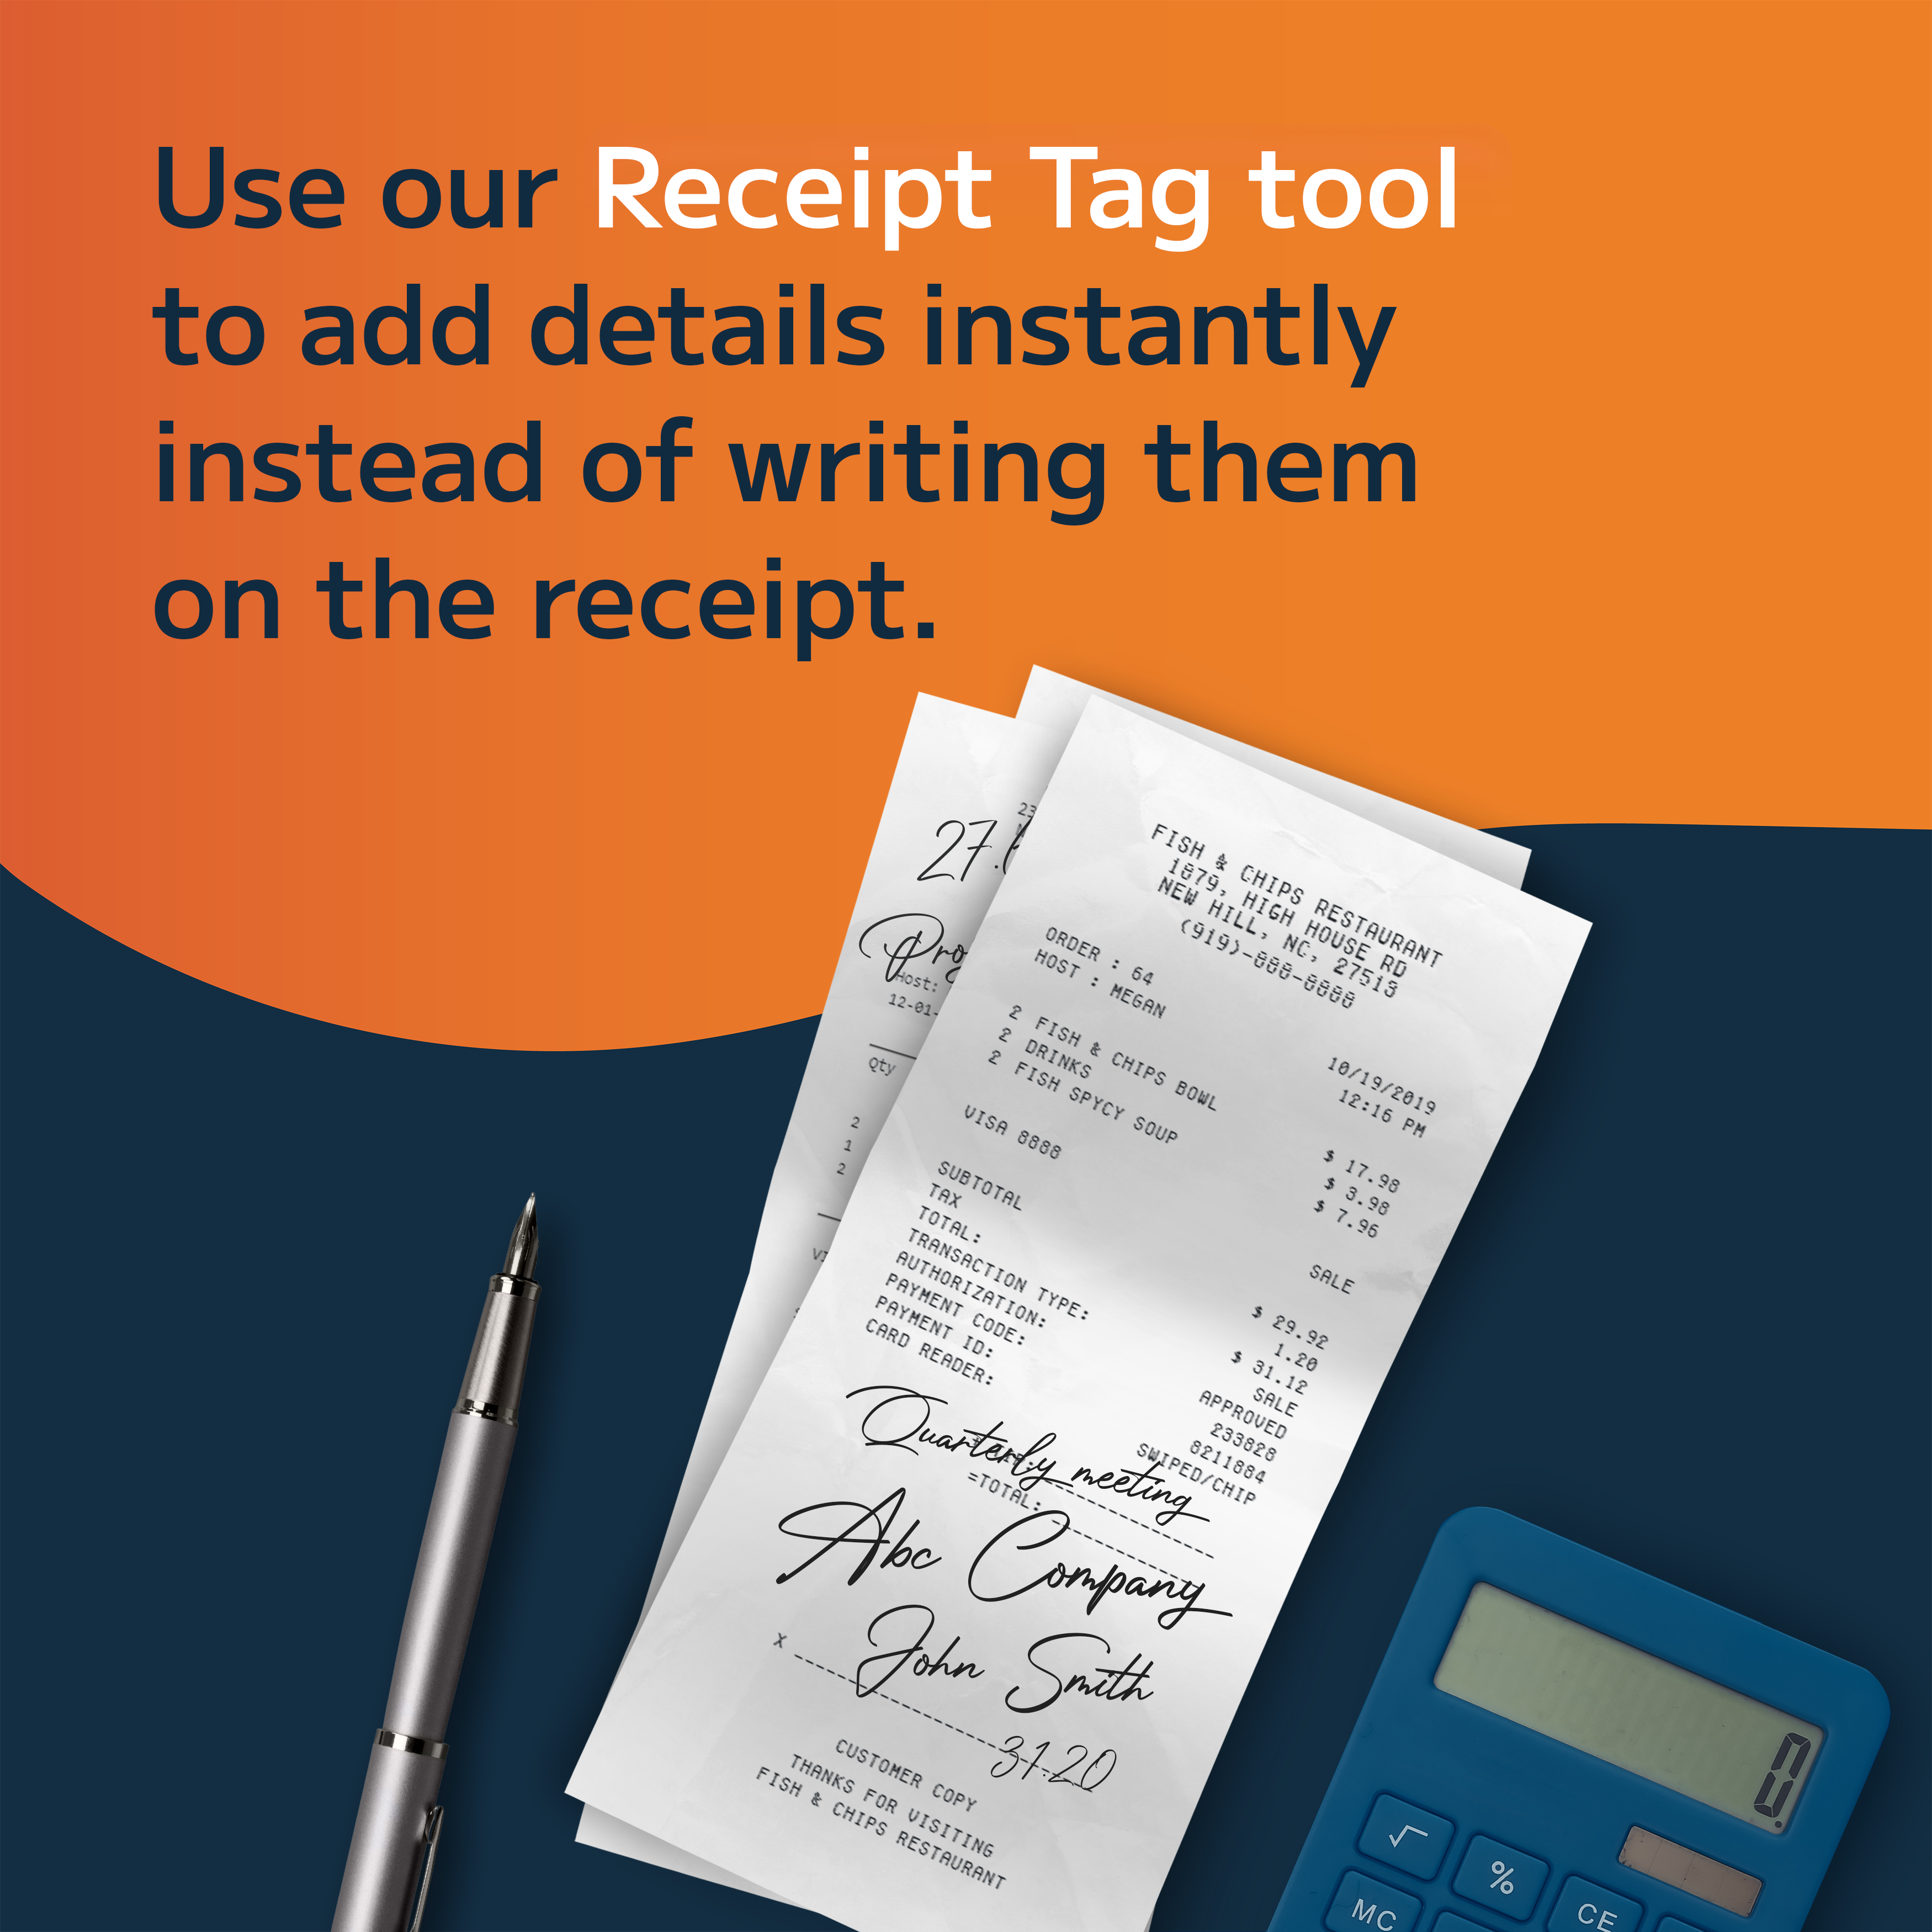 Easily Add Details to Receipts with the Receipt Tag Tool